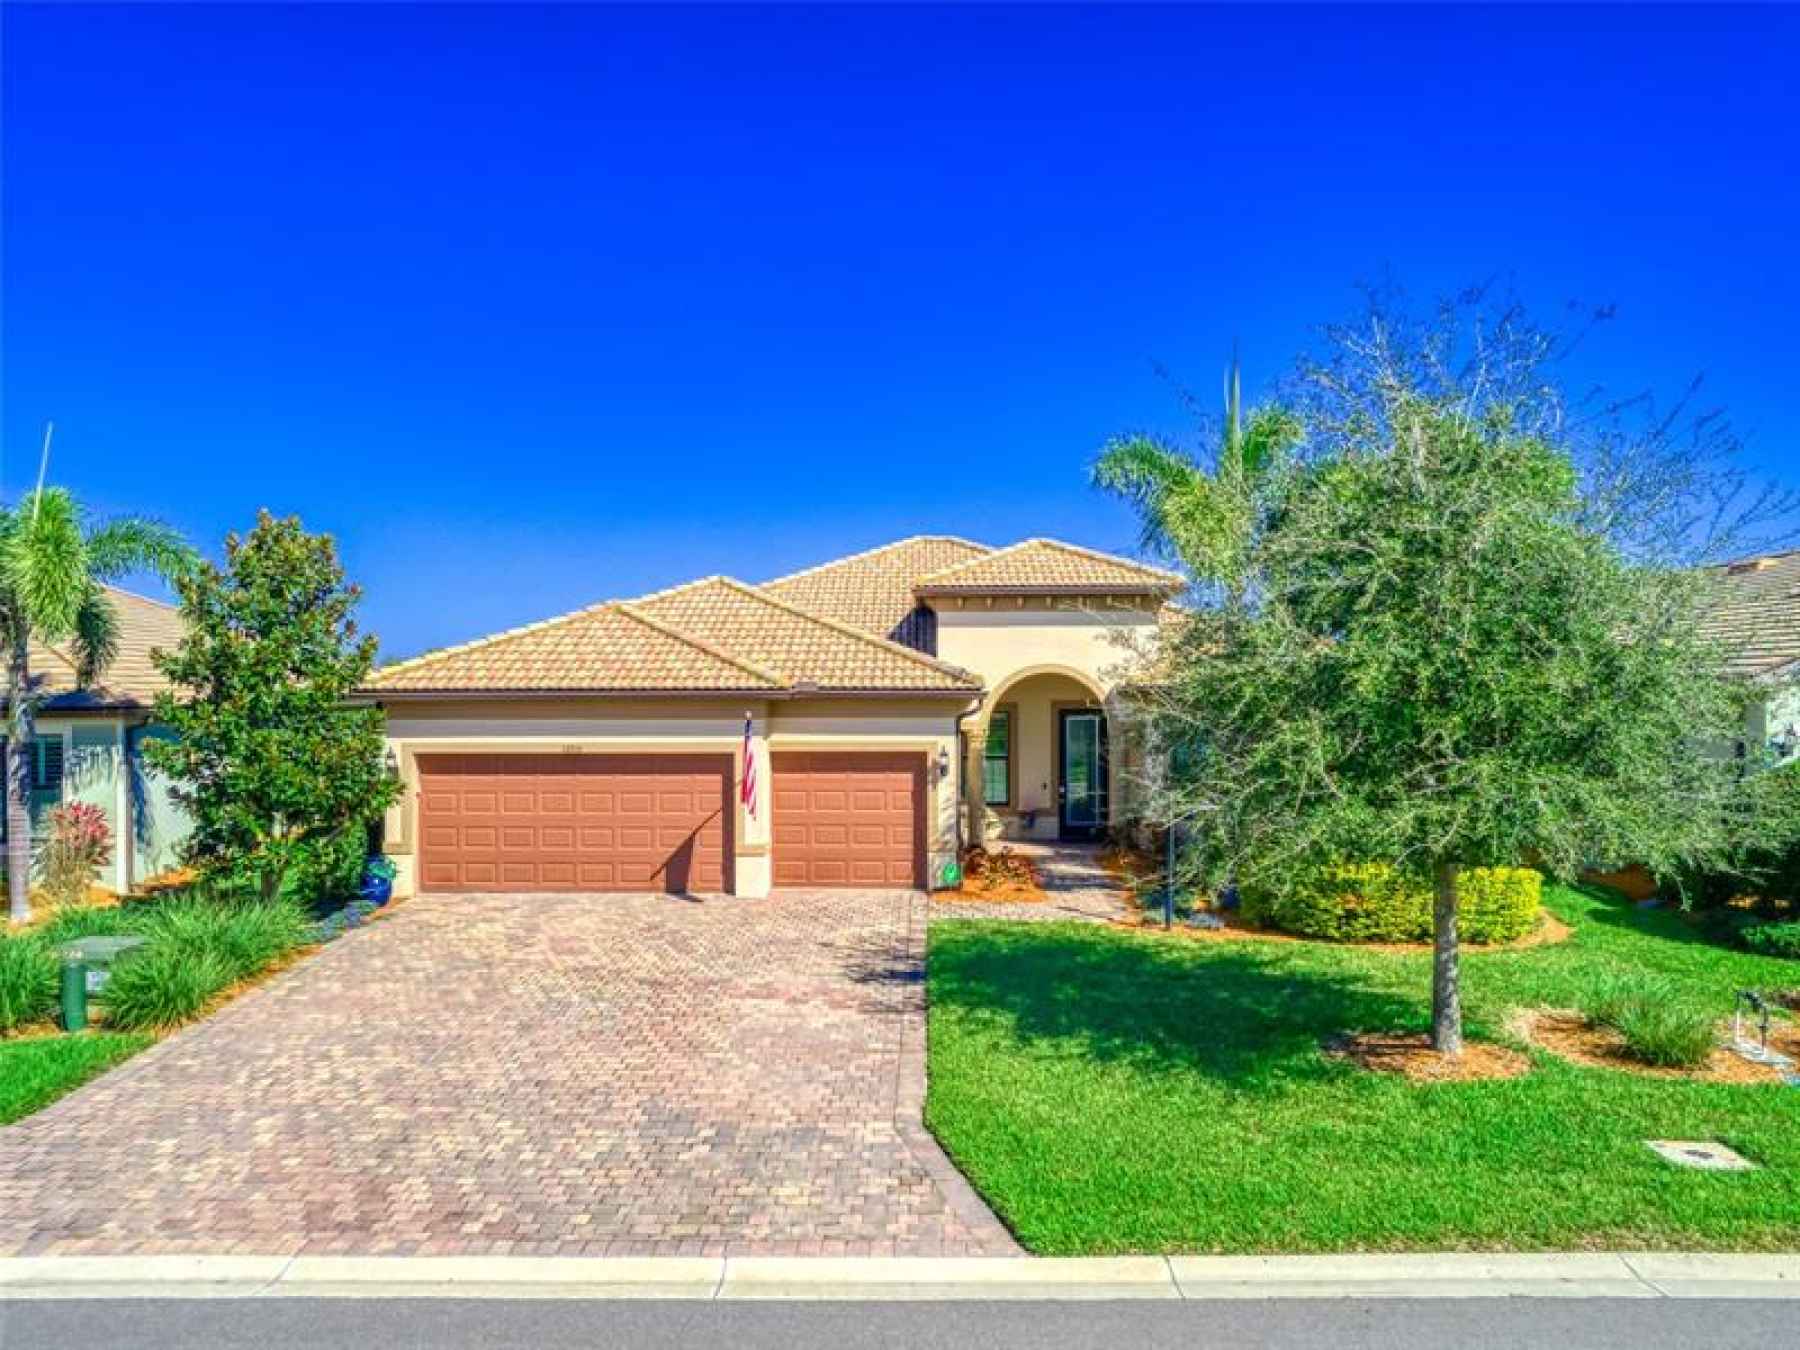 Upscale home with Paver Driveway & Tile Roof